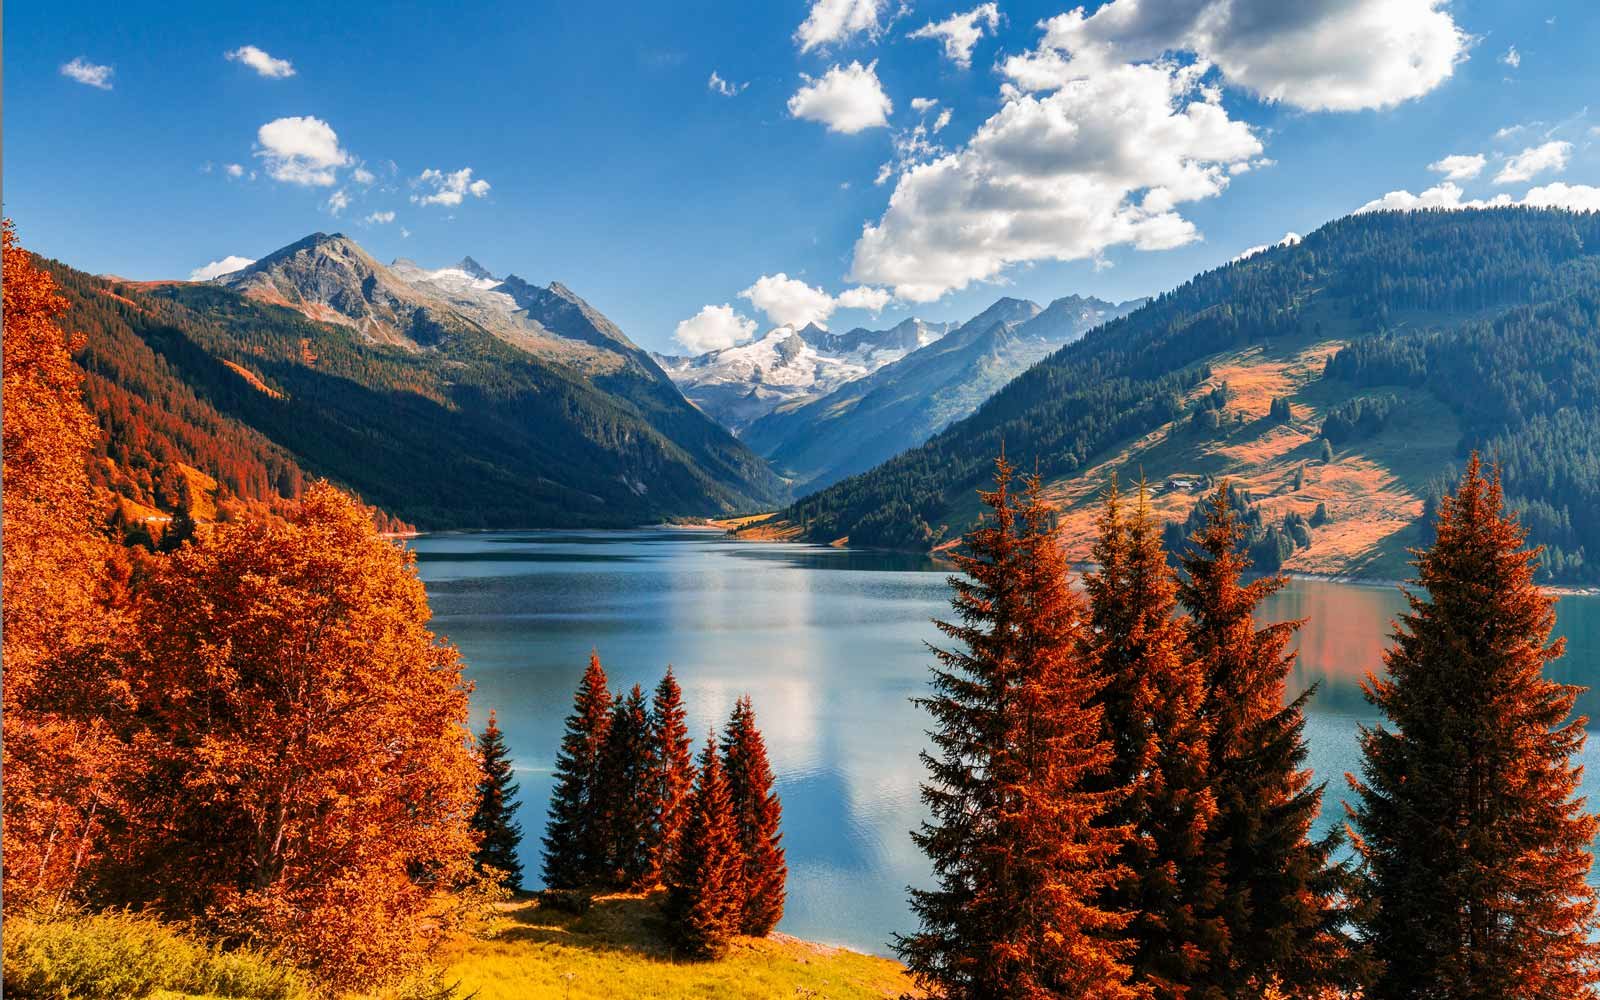 Fabulous Mountain View and Fall Foliage of Alps along a lake in Tyrol, Austria, 1600x1000. (26 August 2016)